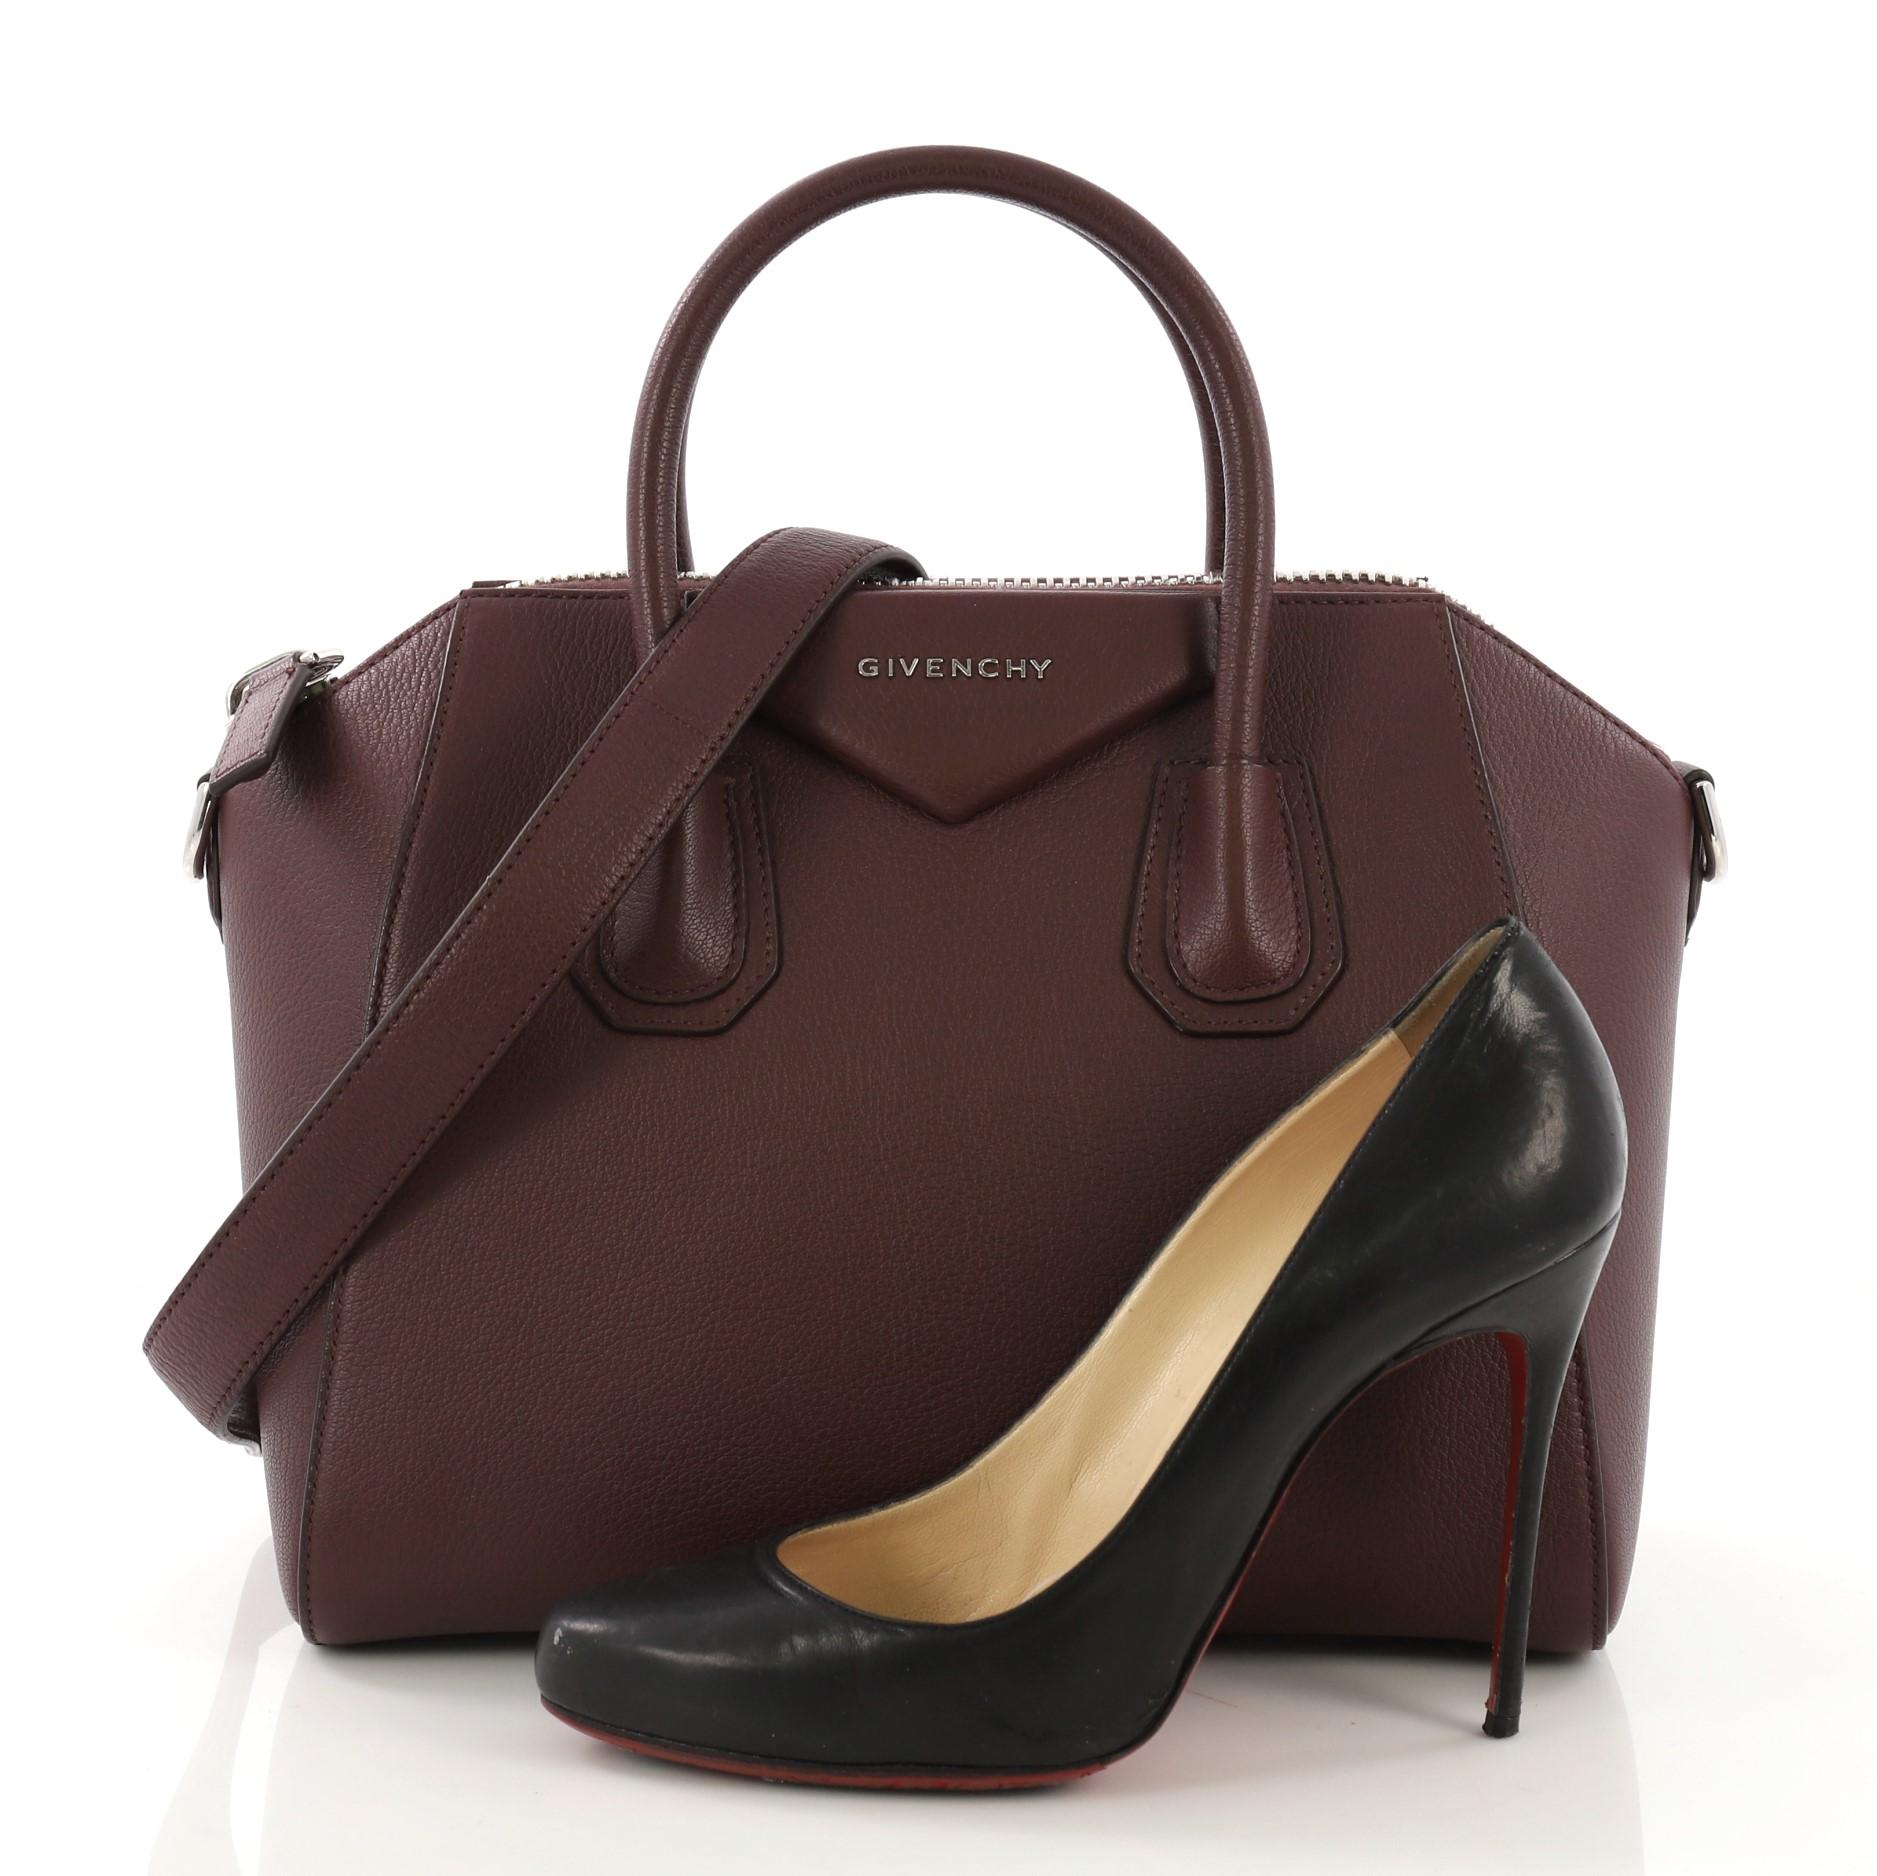 This Givenchy Antigona Bag Leather Small, crafted from burgundy leather, features dual top handles and silver-tone hardware. Its zip closure opens to a beige fabric interior with side zip and slip pockets. **Note: Shoe photographed is used as a